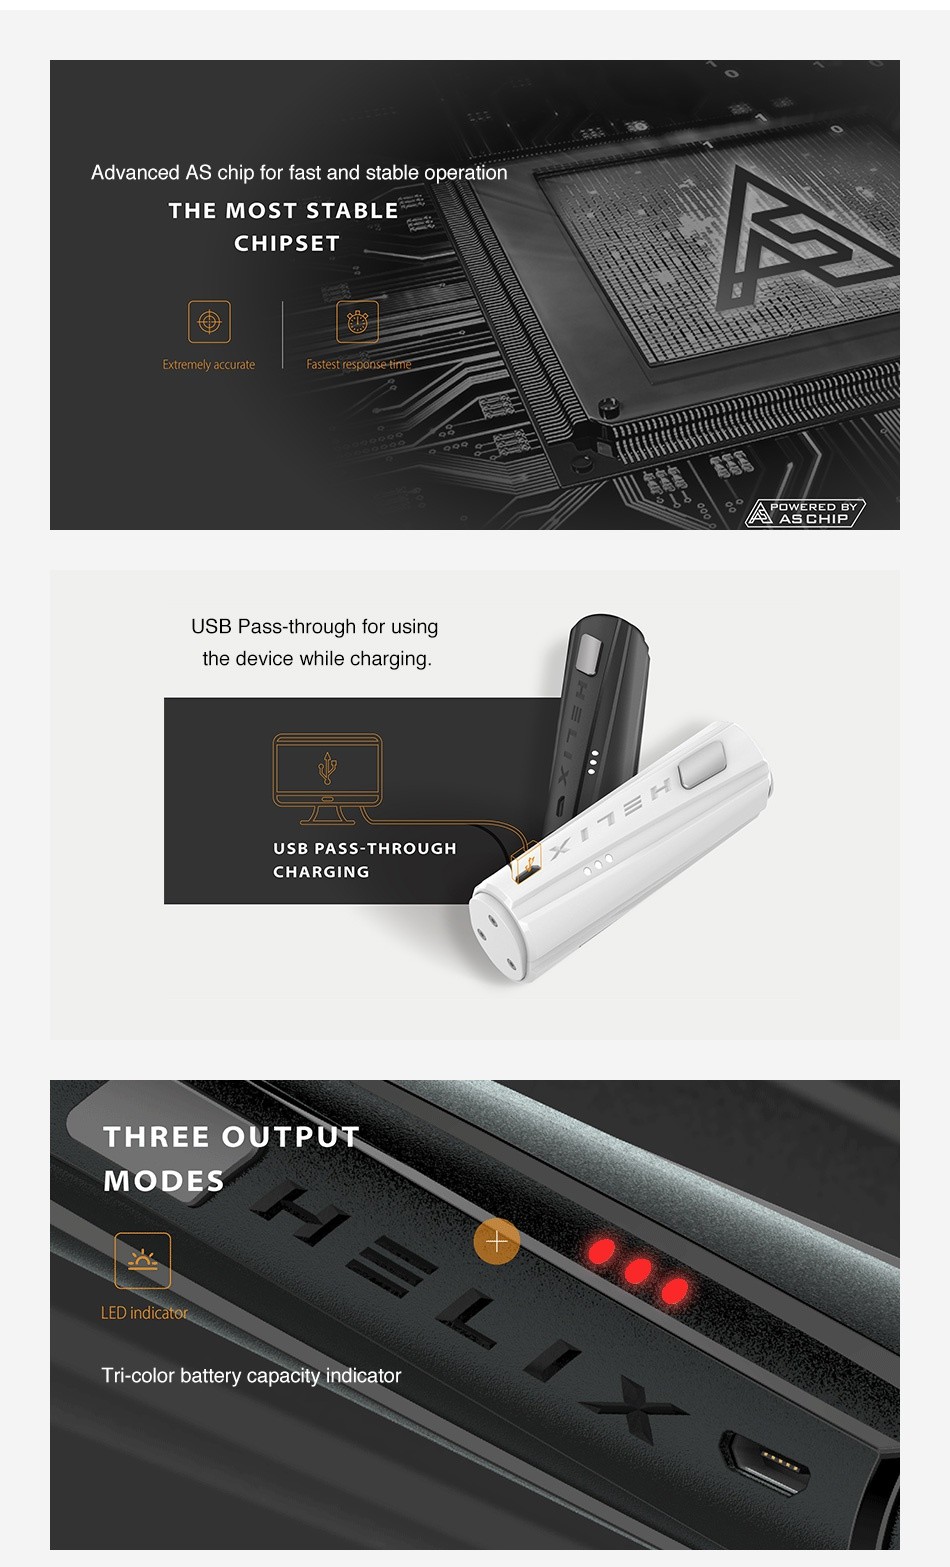 Digiflavor Helix VV MOD Advanced AS chip for fast and stable operation THE MOST STABLE CHIPSET Extremely accurat Fastest re P USB Pass through for using the device while charging USB PASS THROUGH CHARGING THREE OUTPUT MODES LED indicator Tri color battery capacity indicator